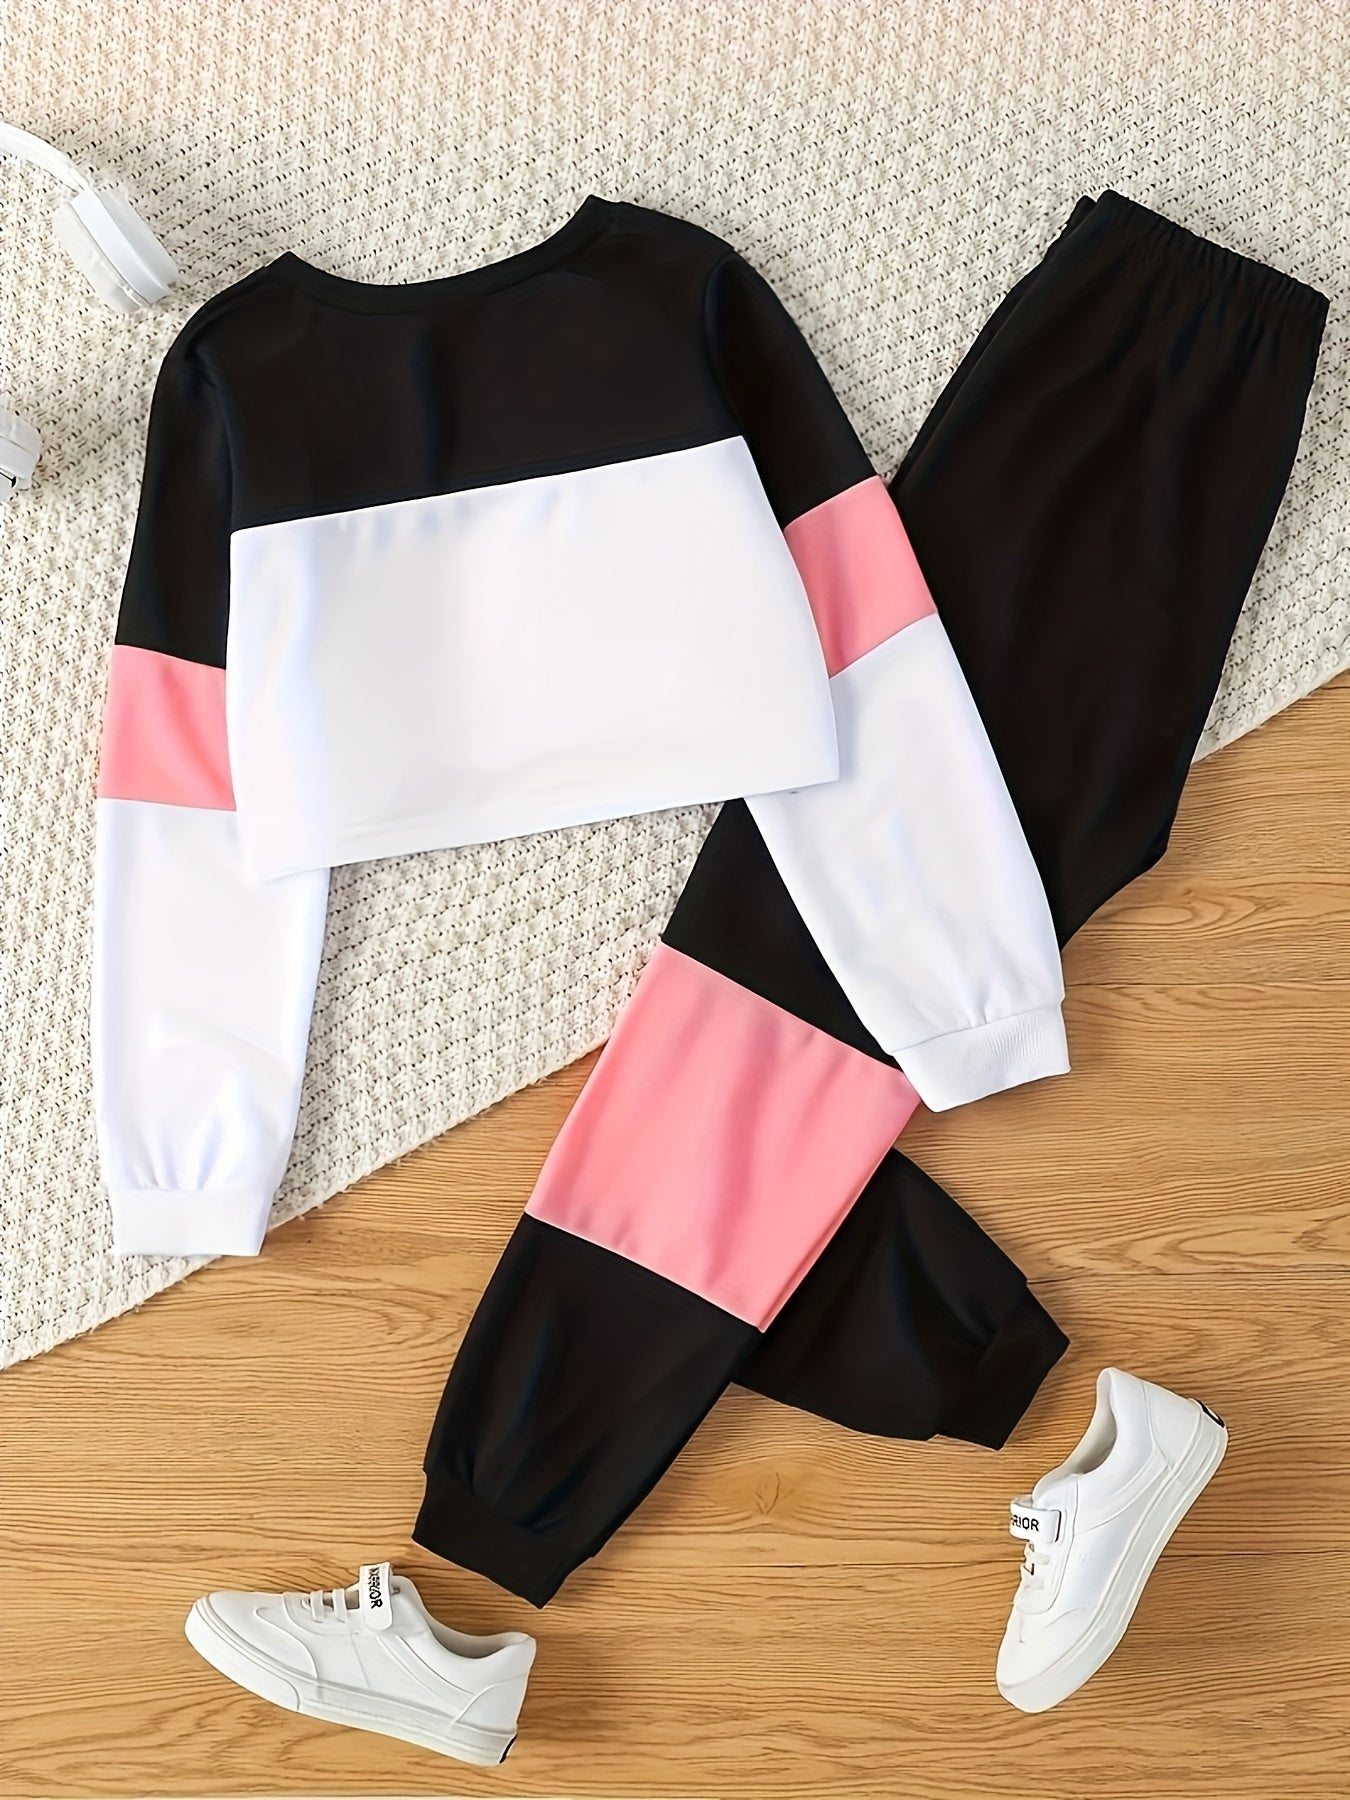 Alphabet Print Trendy Girls Color Block Long Sleeve Sweatshirt & Sports Pants Set, Girls Casual Outfit For Spring Fall